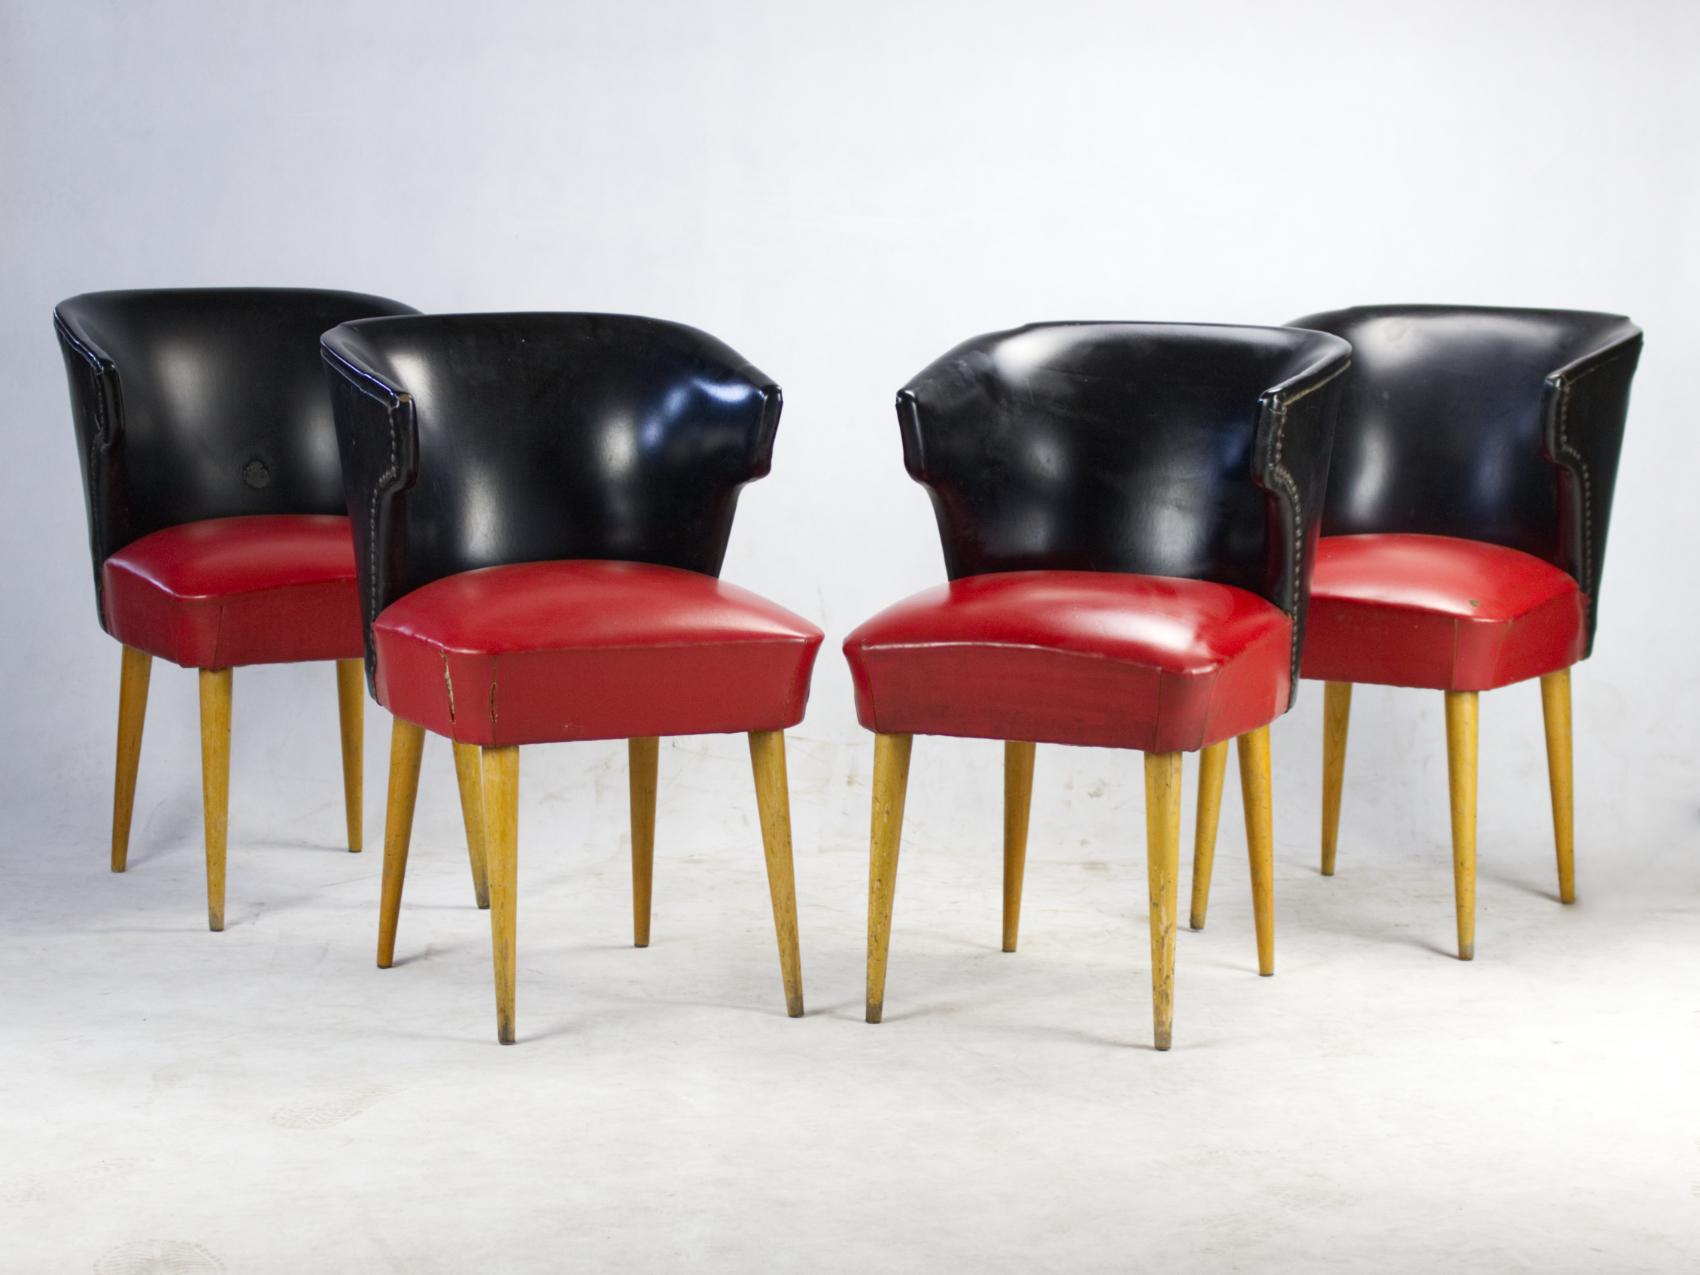 Theese chairs were used in the Nador café in Budapest during the 1960s and 1970s. Chairs were made in Hungary in the 1960s. Frame and the legs are made of beech and the upholstery is red and black leatherette. Signs of wear caused by years of use in